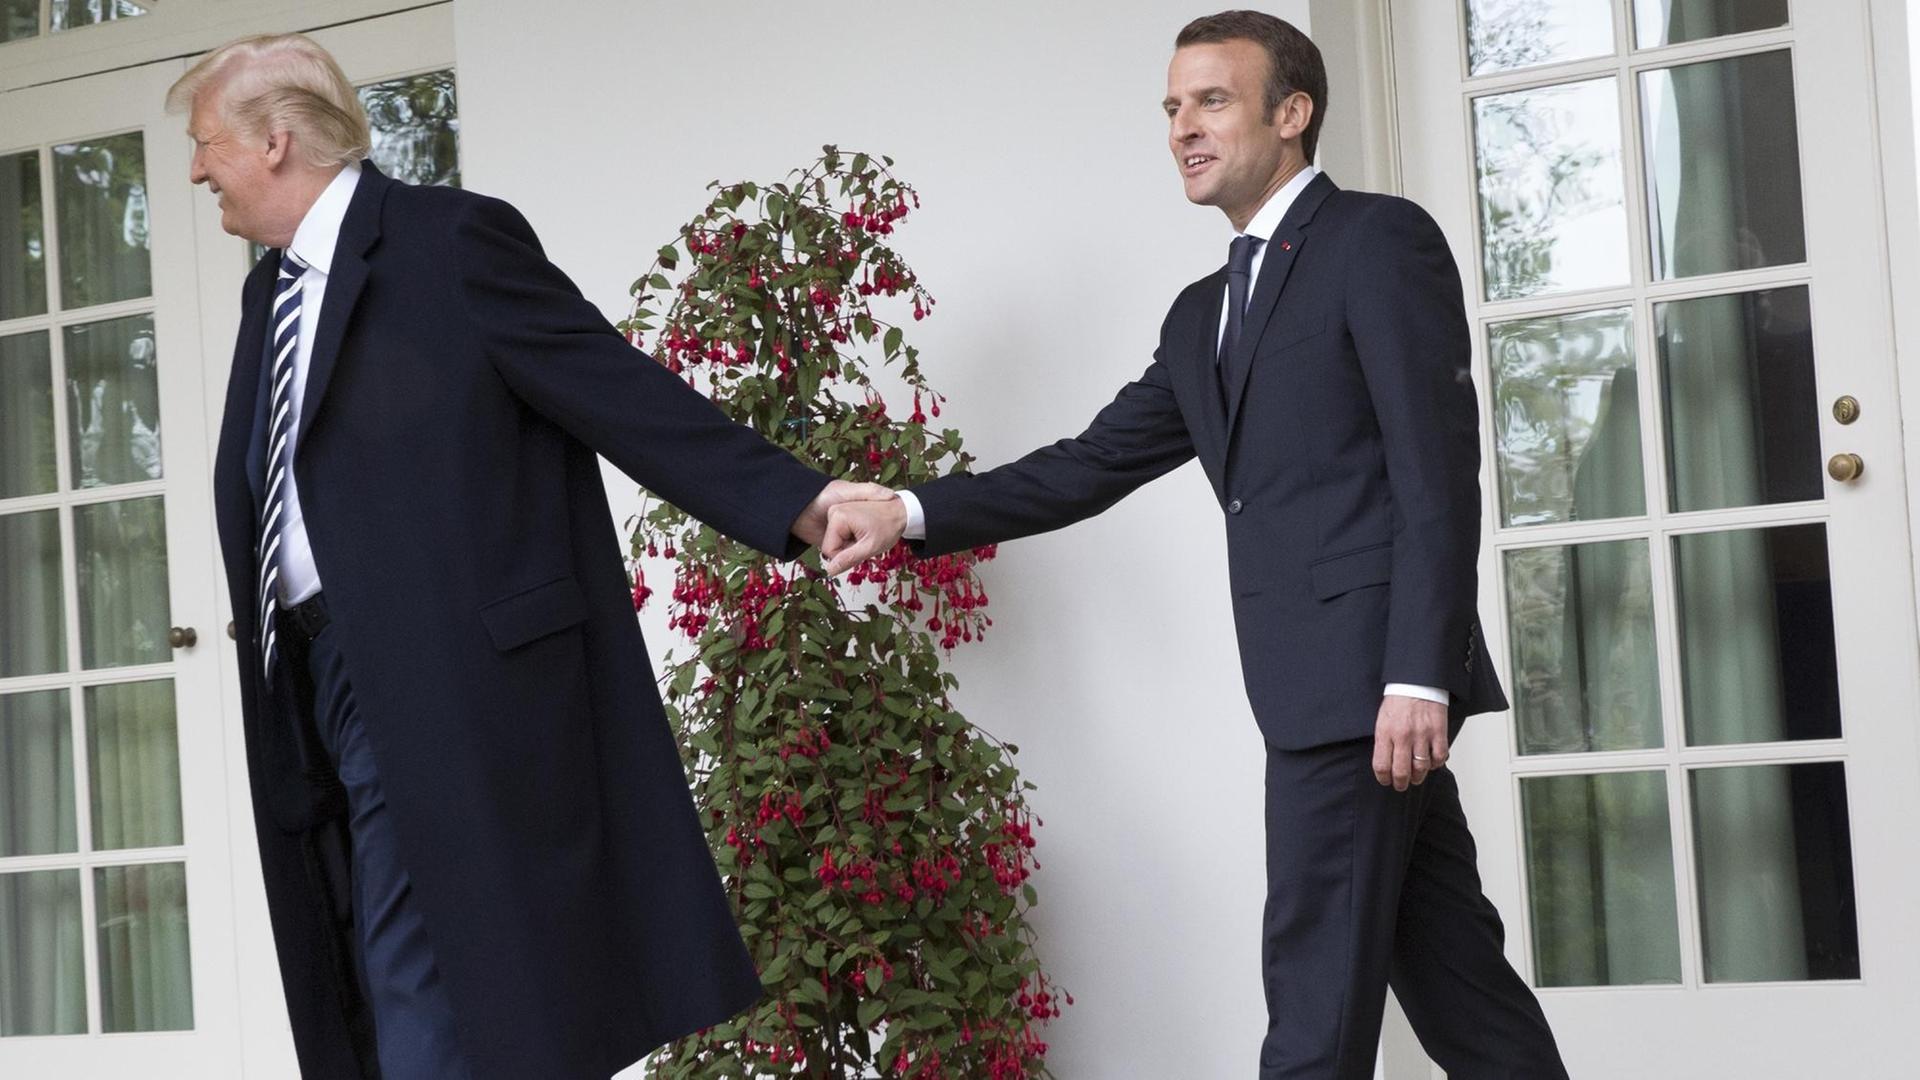 United States President Donald J. Trump leads President Emmanuel Macron of France to the Oval Office during a state visit to The White House in Washington, DC, April 24, 2018. Credit: Chris Kleponis / Pool via CNP Foto: Chris Kleponis/Pool/Consolidated/dpa | Verwendung weltweit